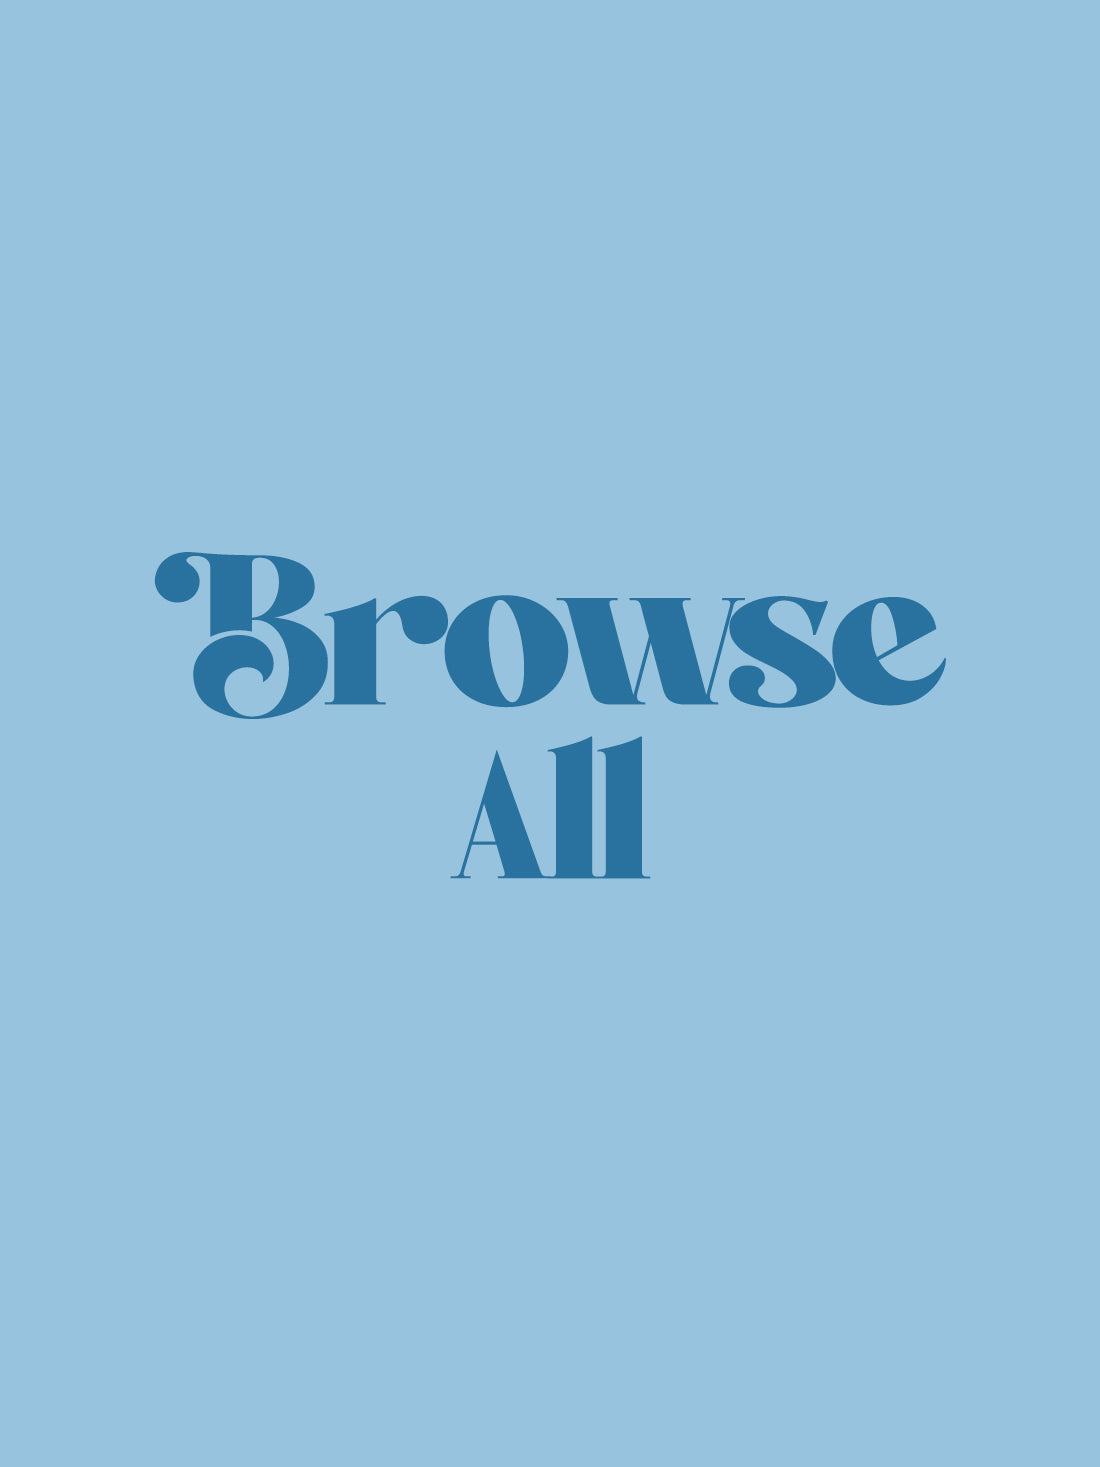 BROWSE ALL